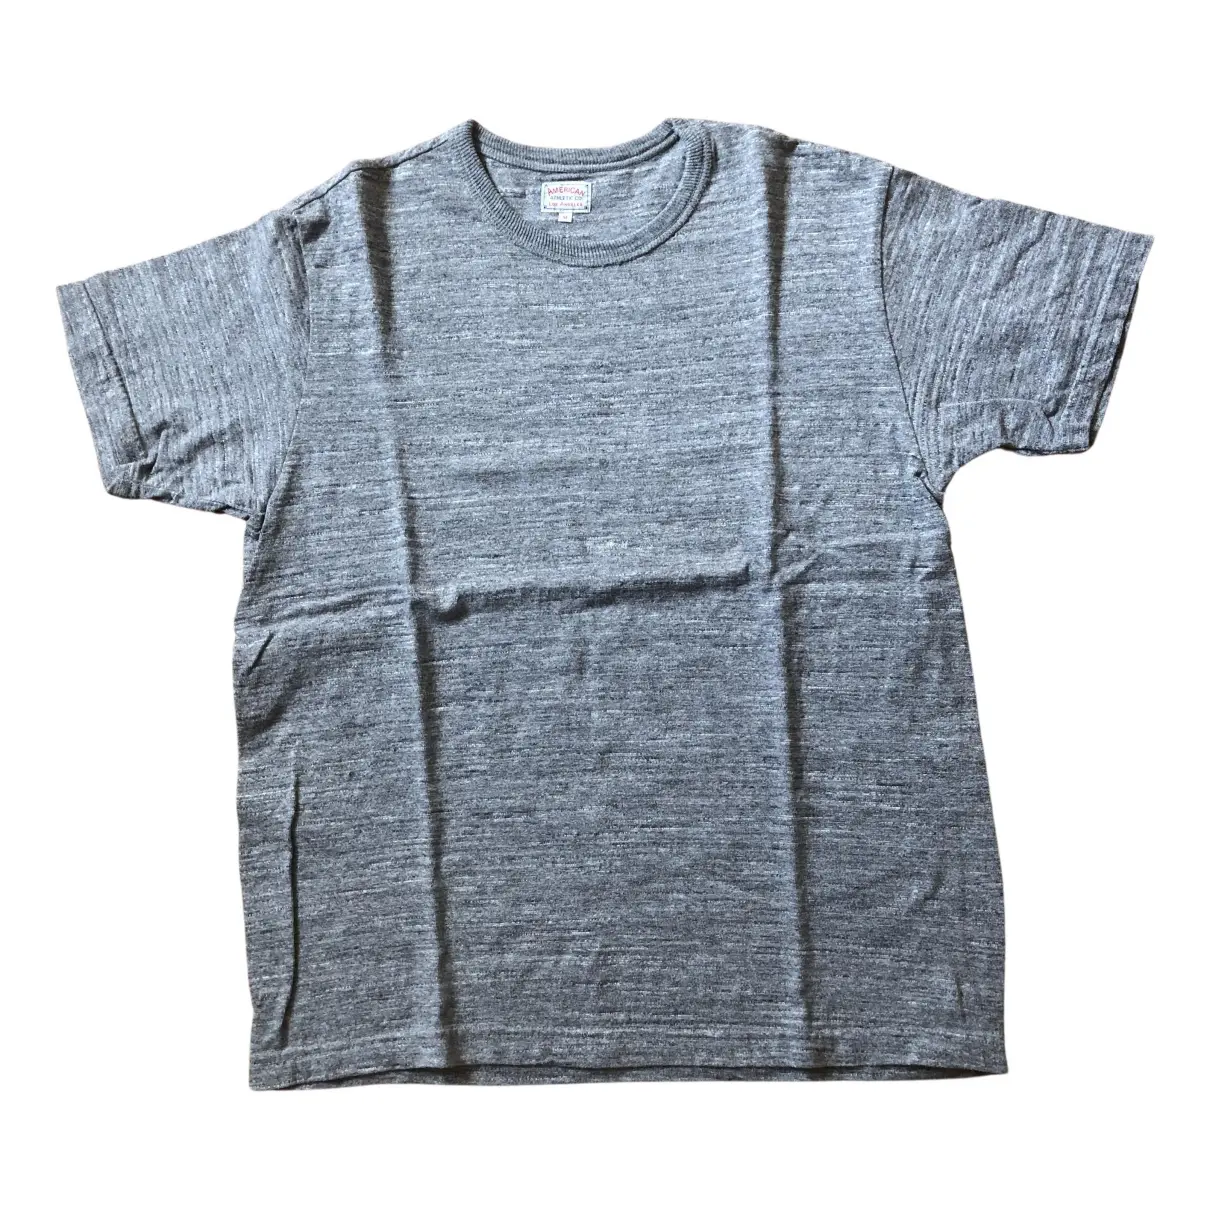 Grey Cotton T-shirt The Real Mccoy's